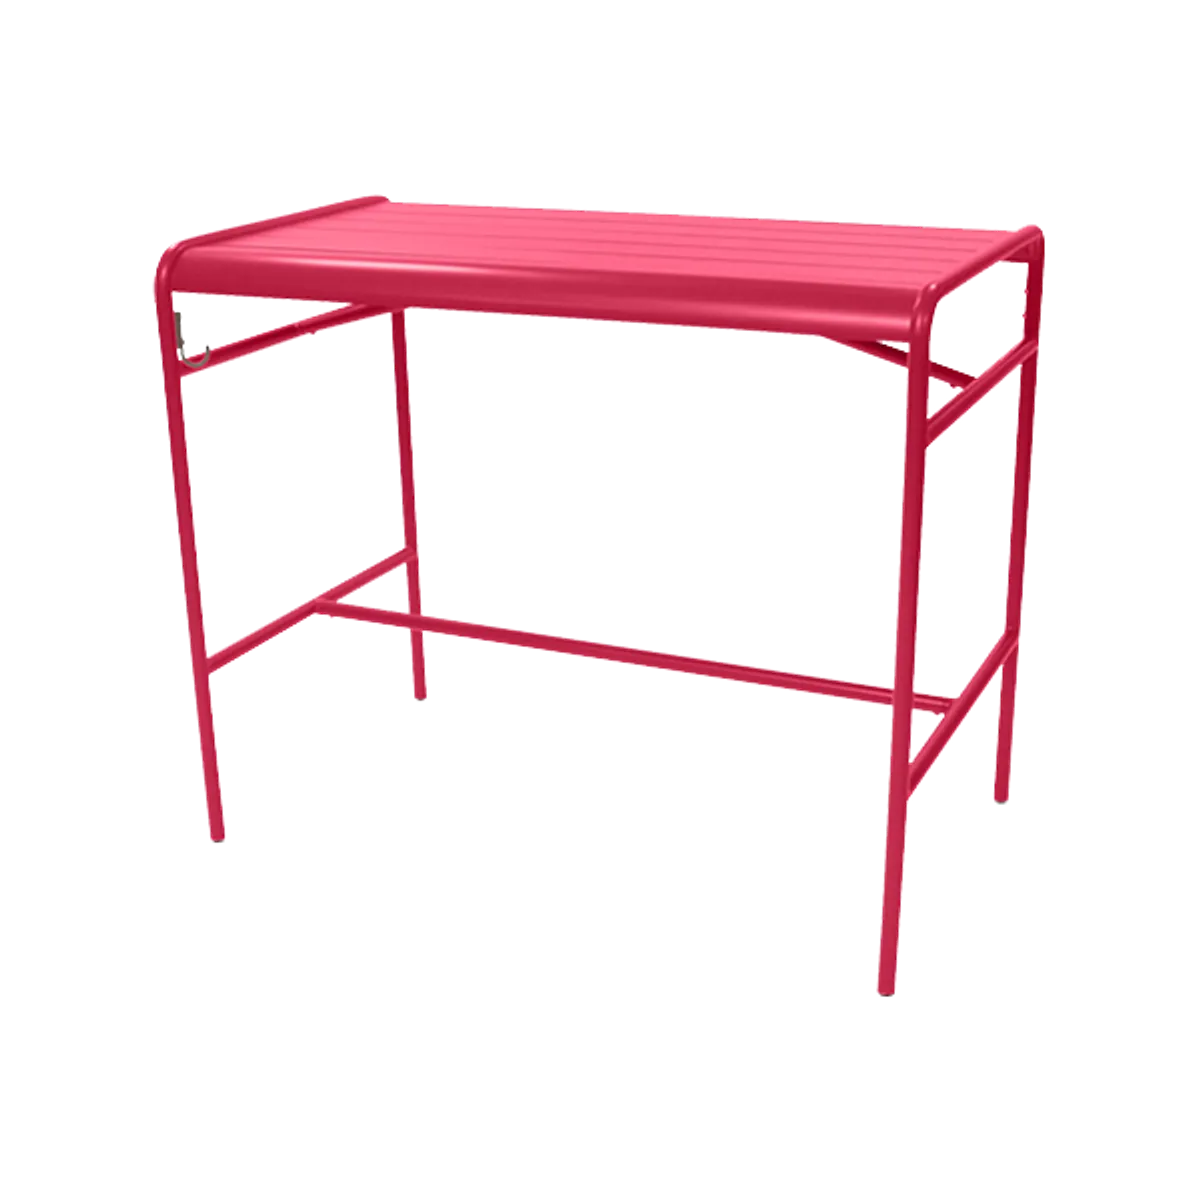 Web Luxembourg High Table Outdoor Furniture For Cafes And Bars Pink